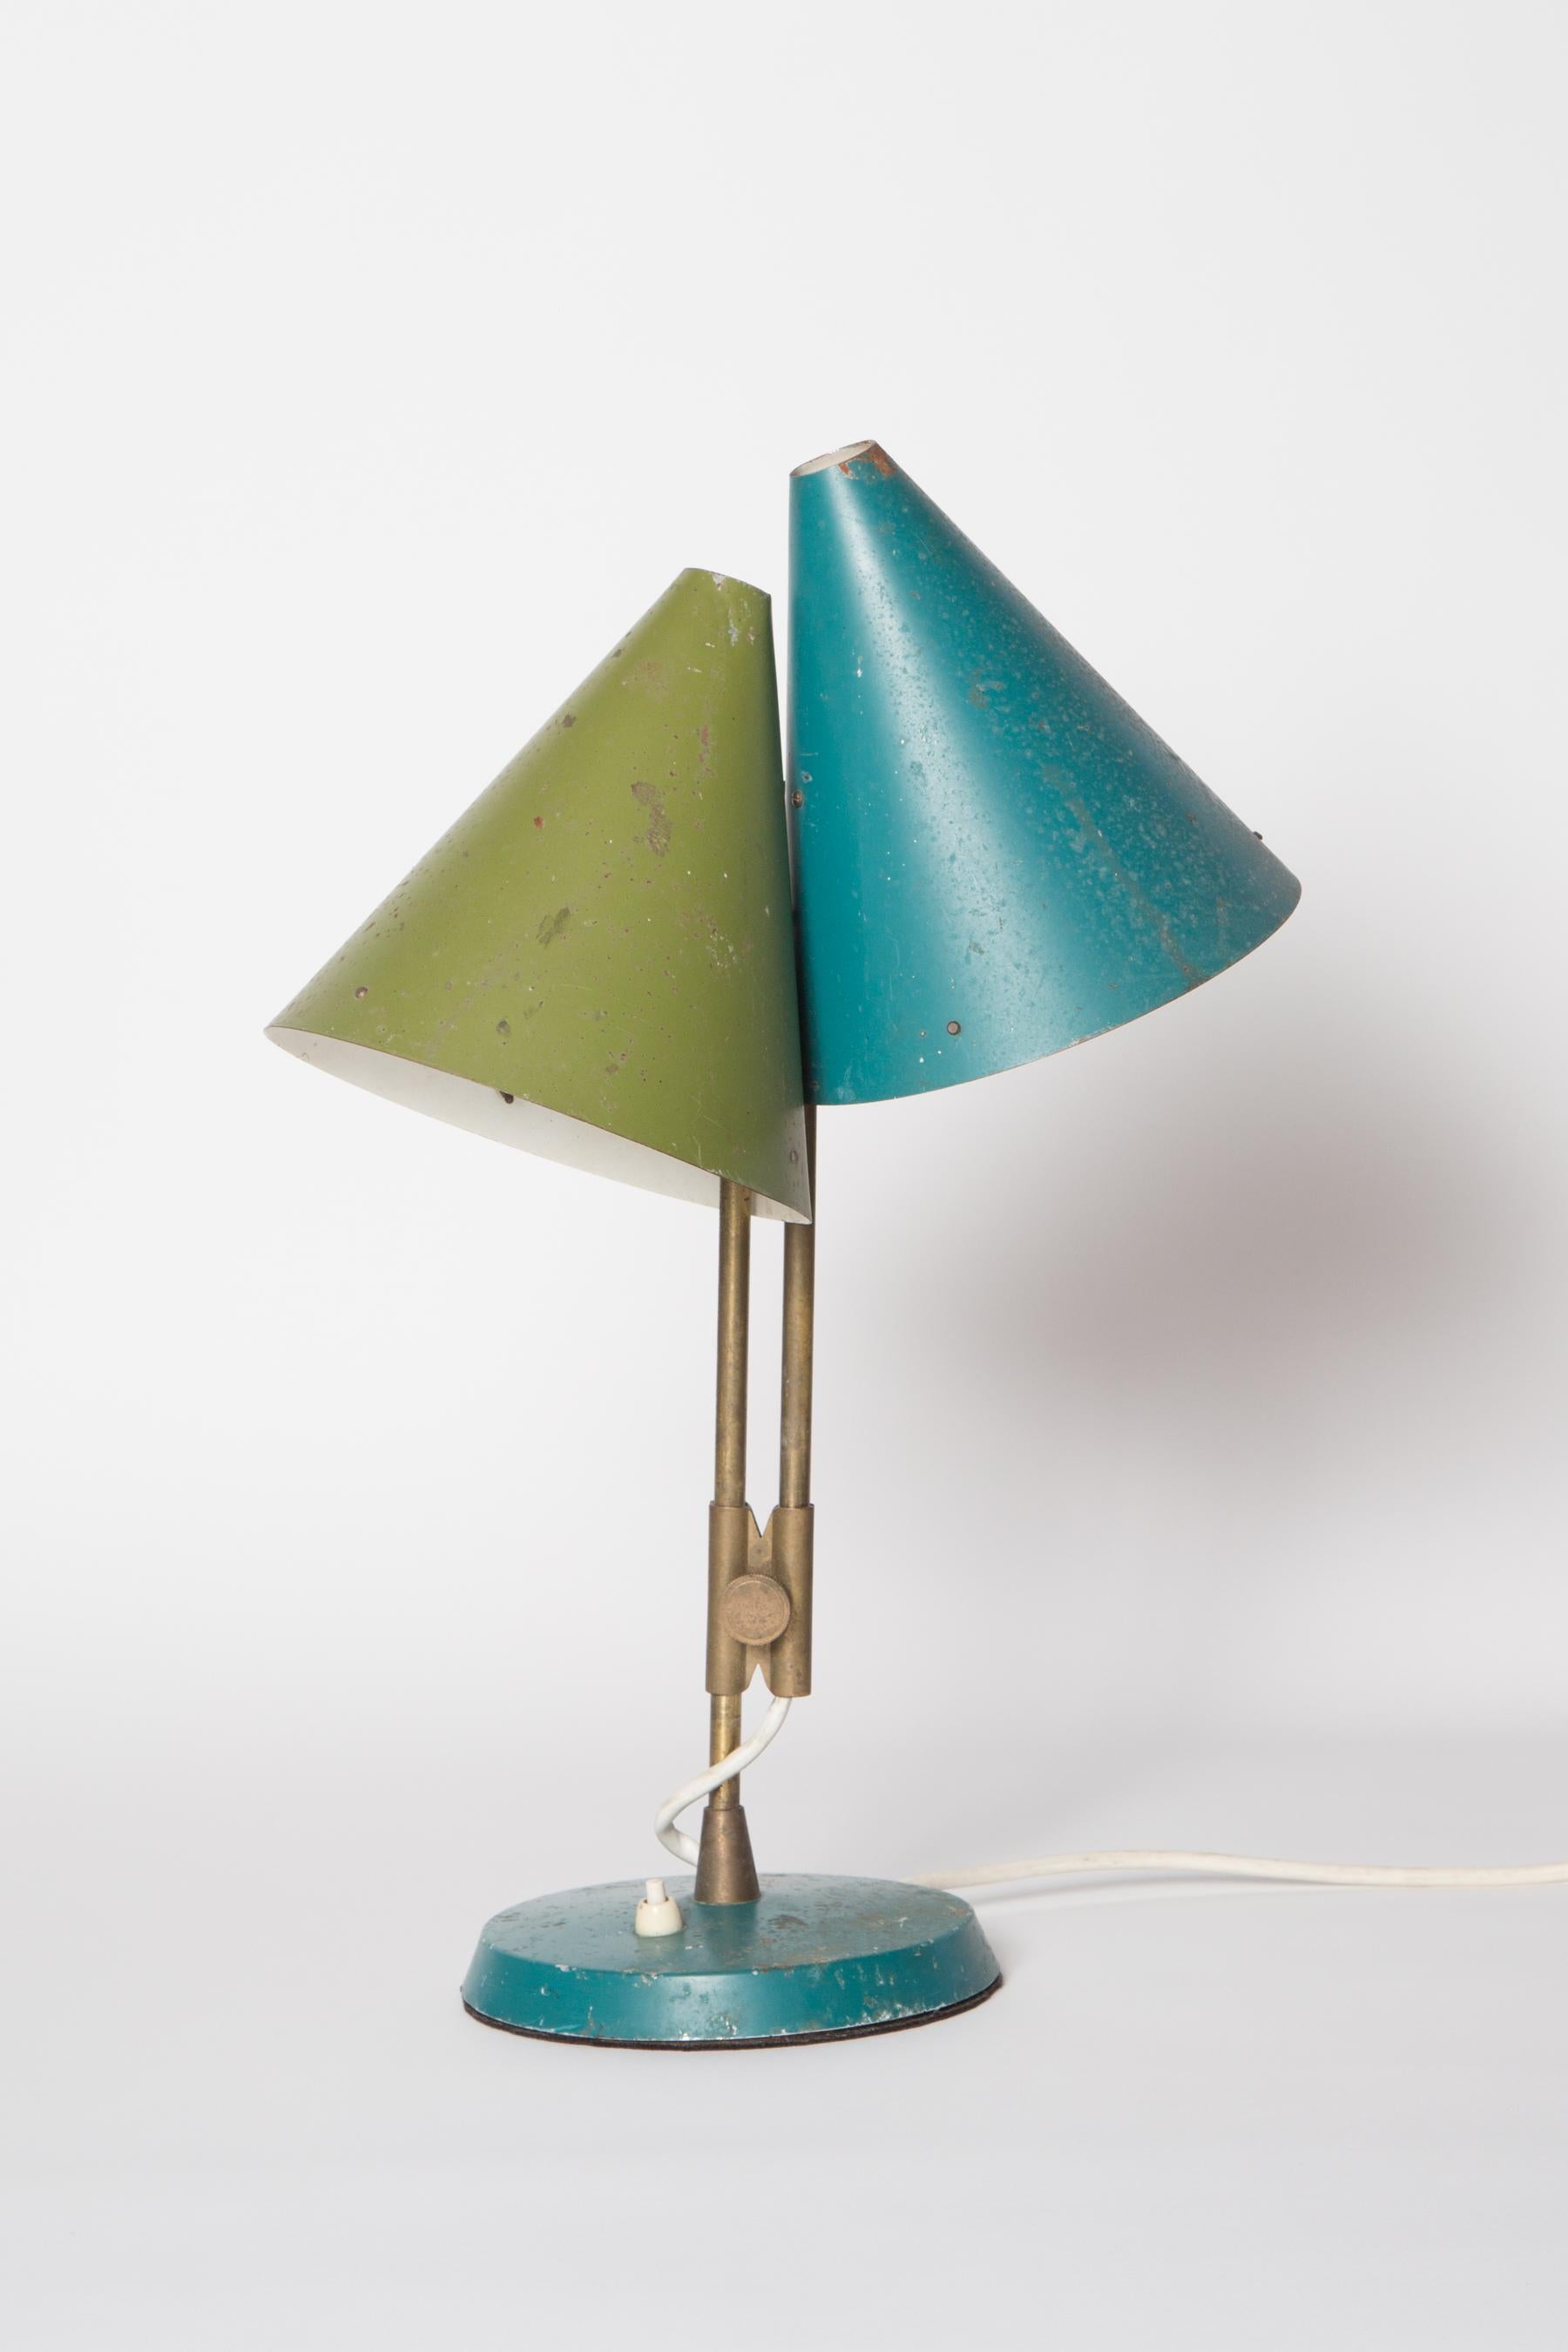 1959 Bent Karlby 'Mosaik' Adjustable Brass & Lacquered Metal Table Lamp for Lyfa 10